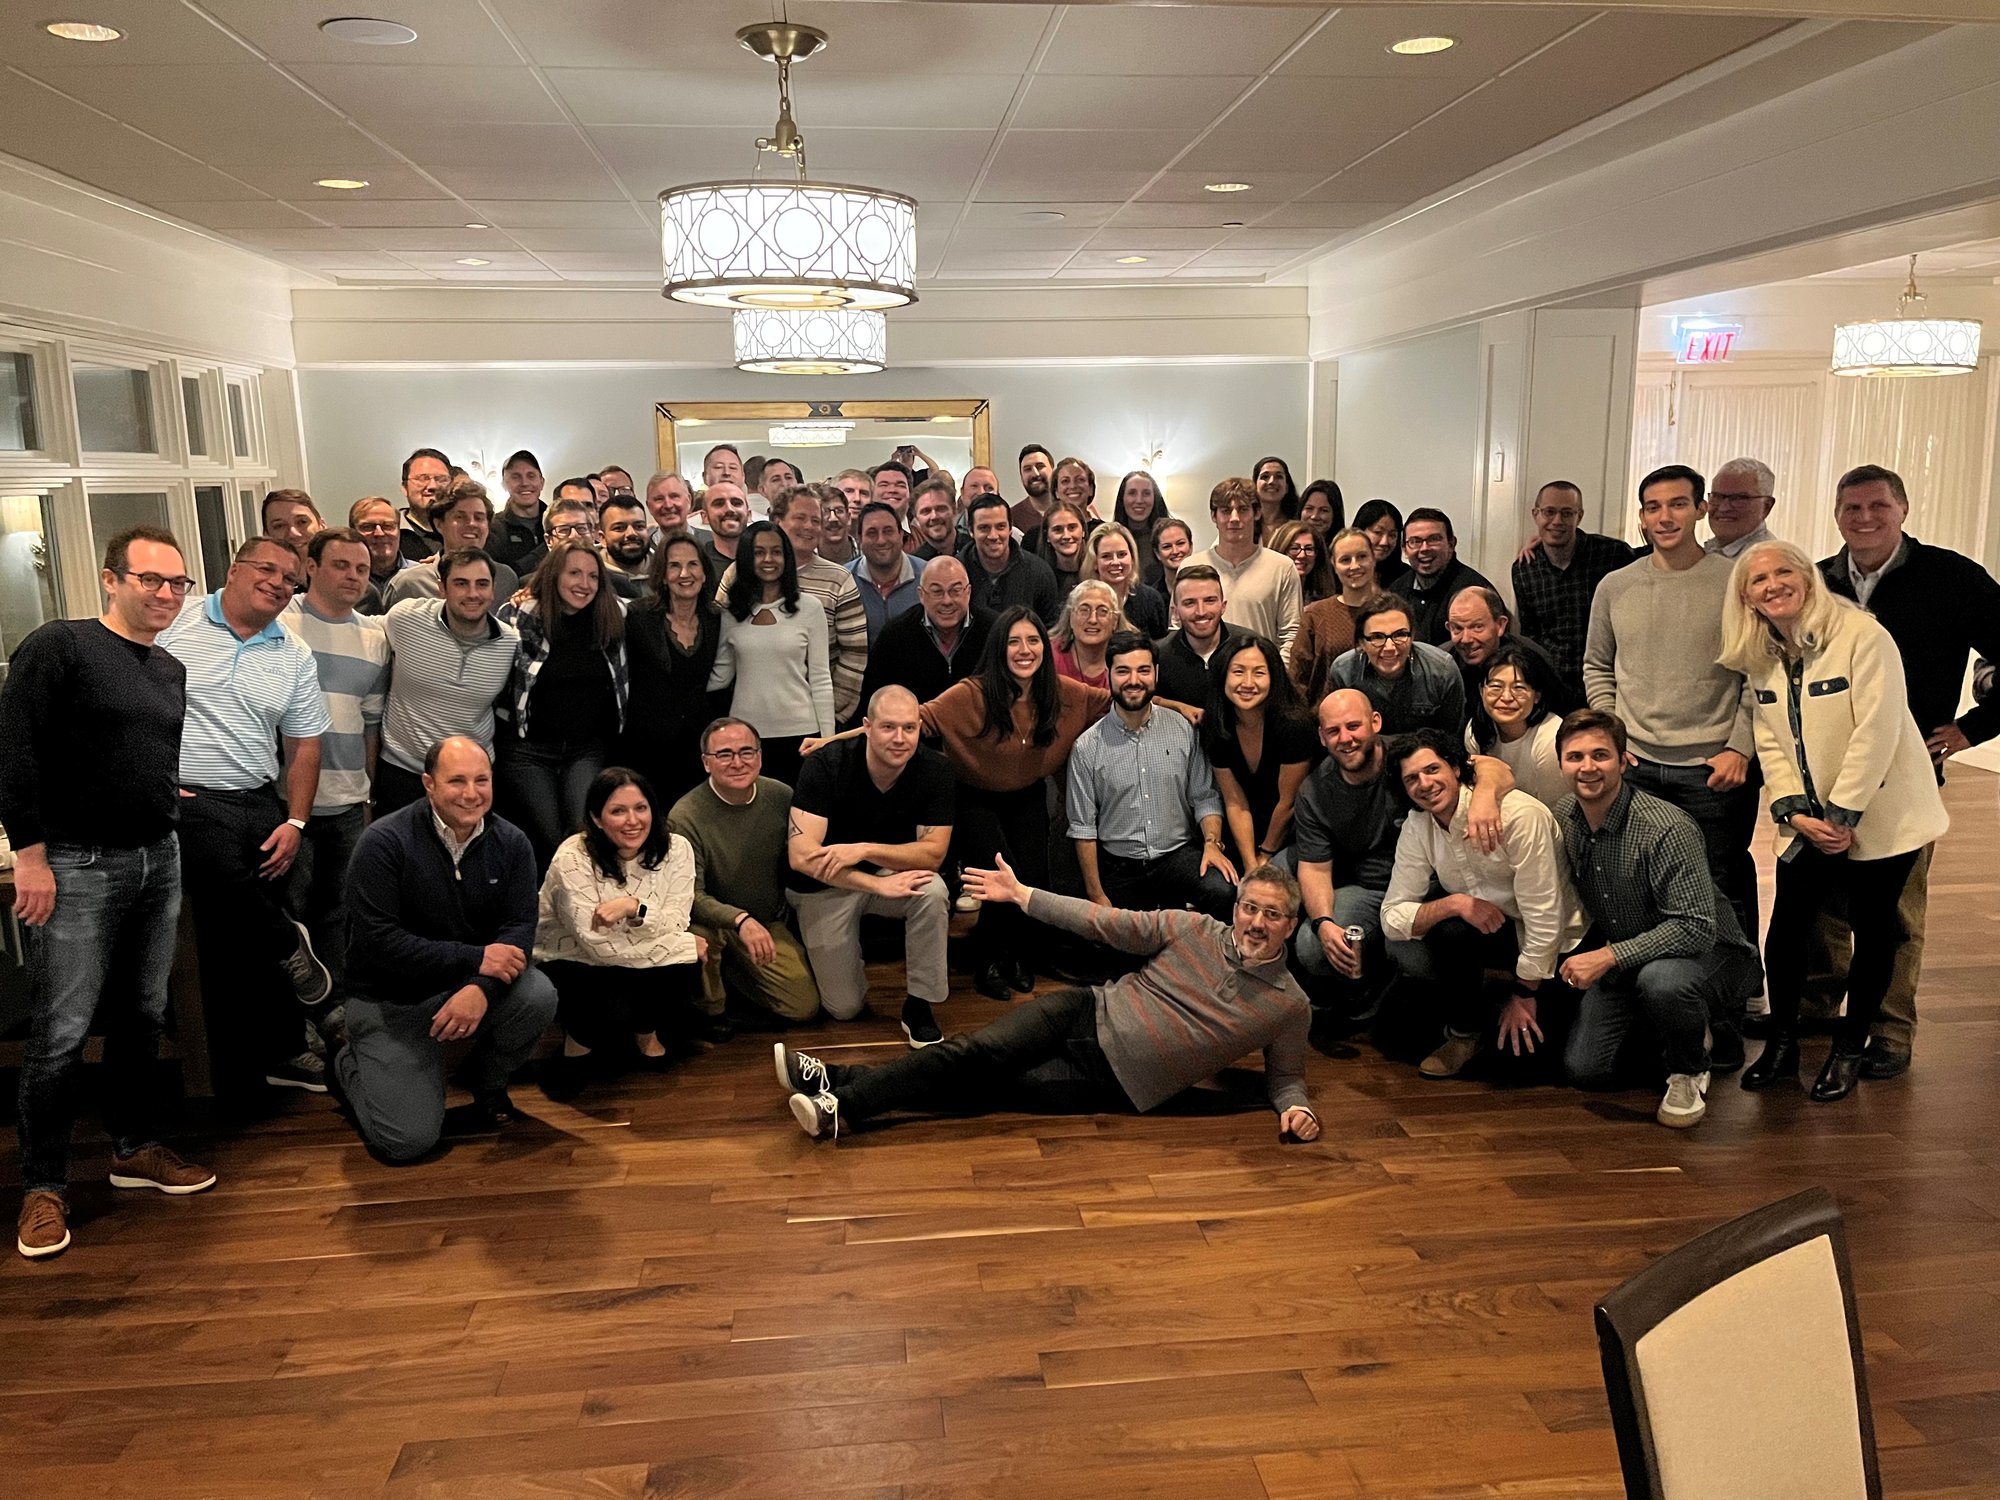 Offsite - group photo